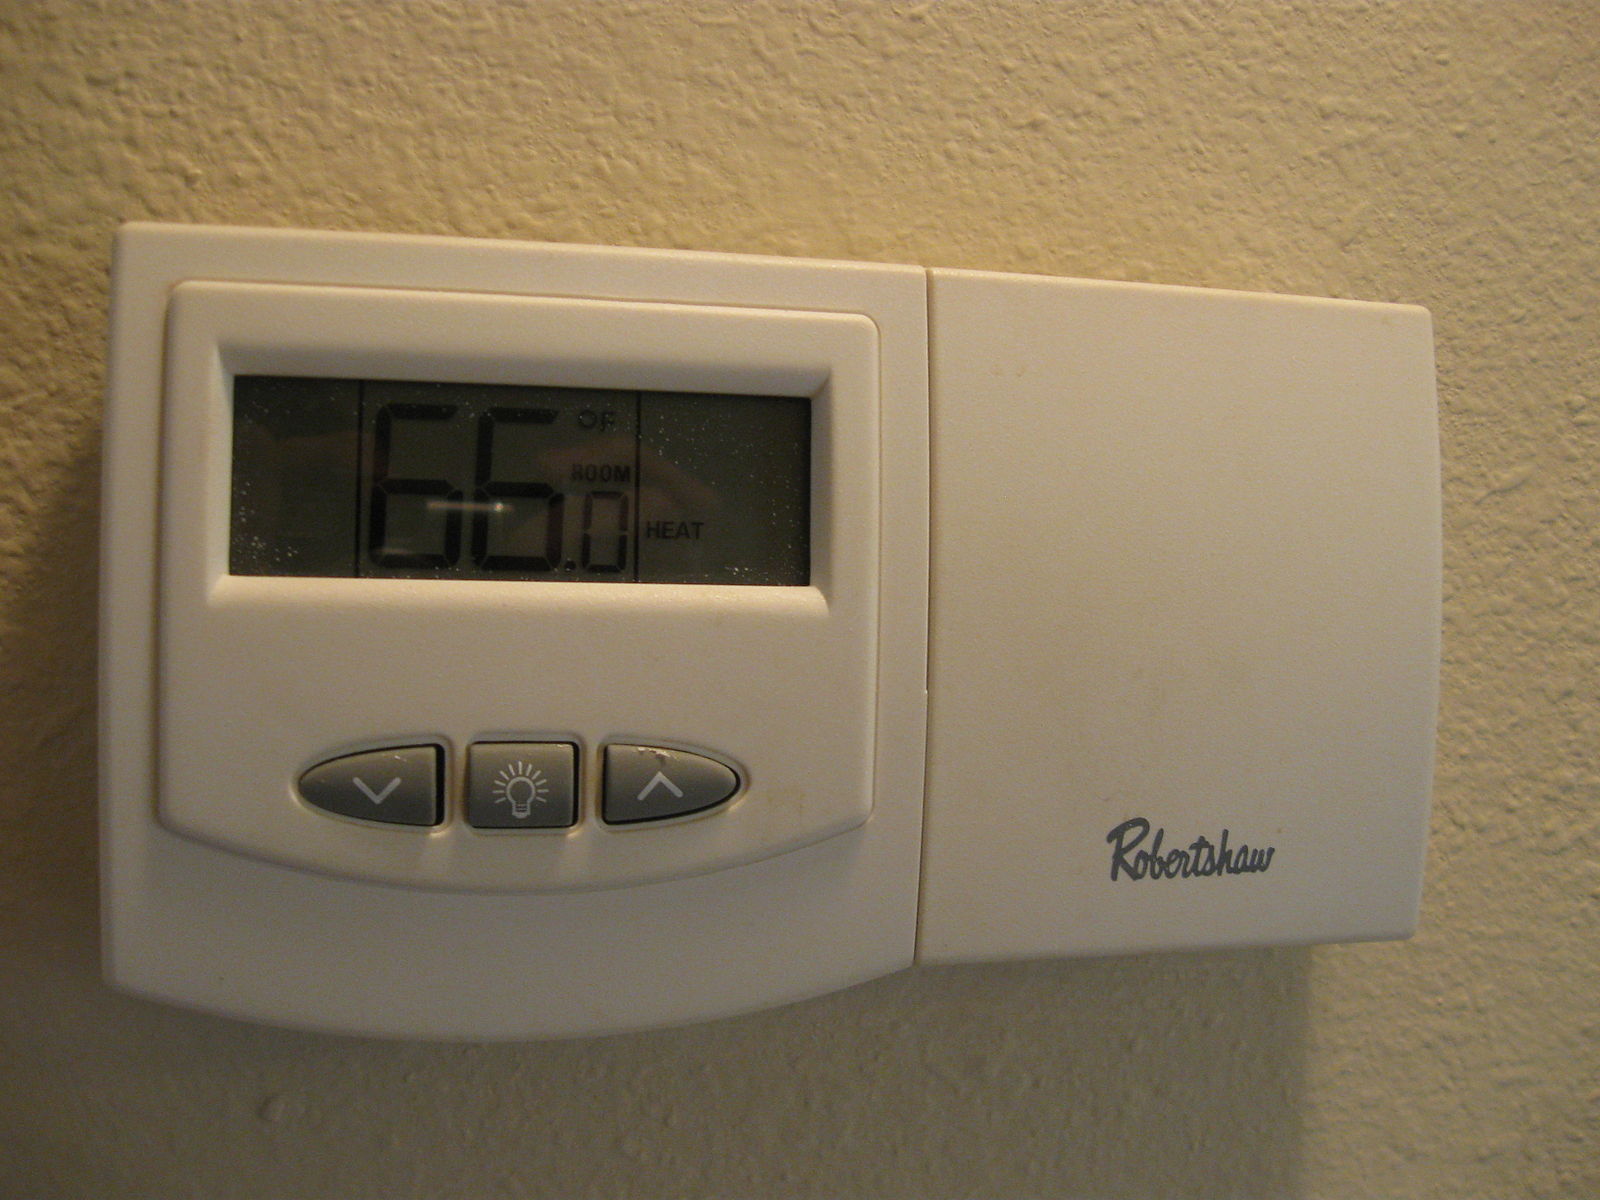 why thermostat says hold